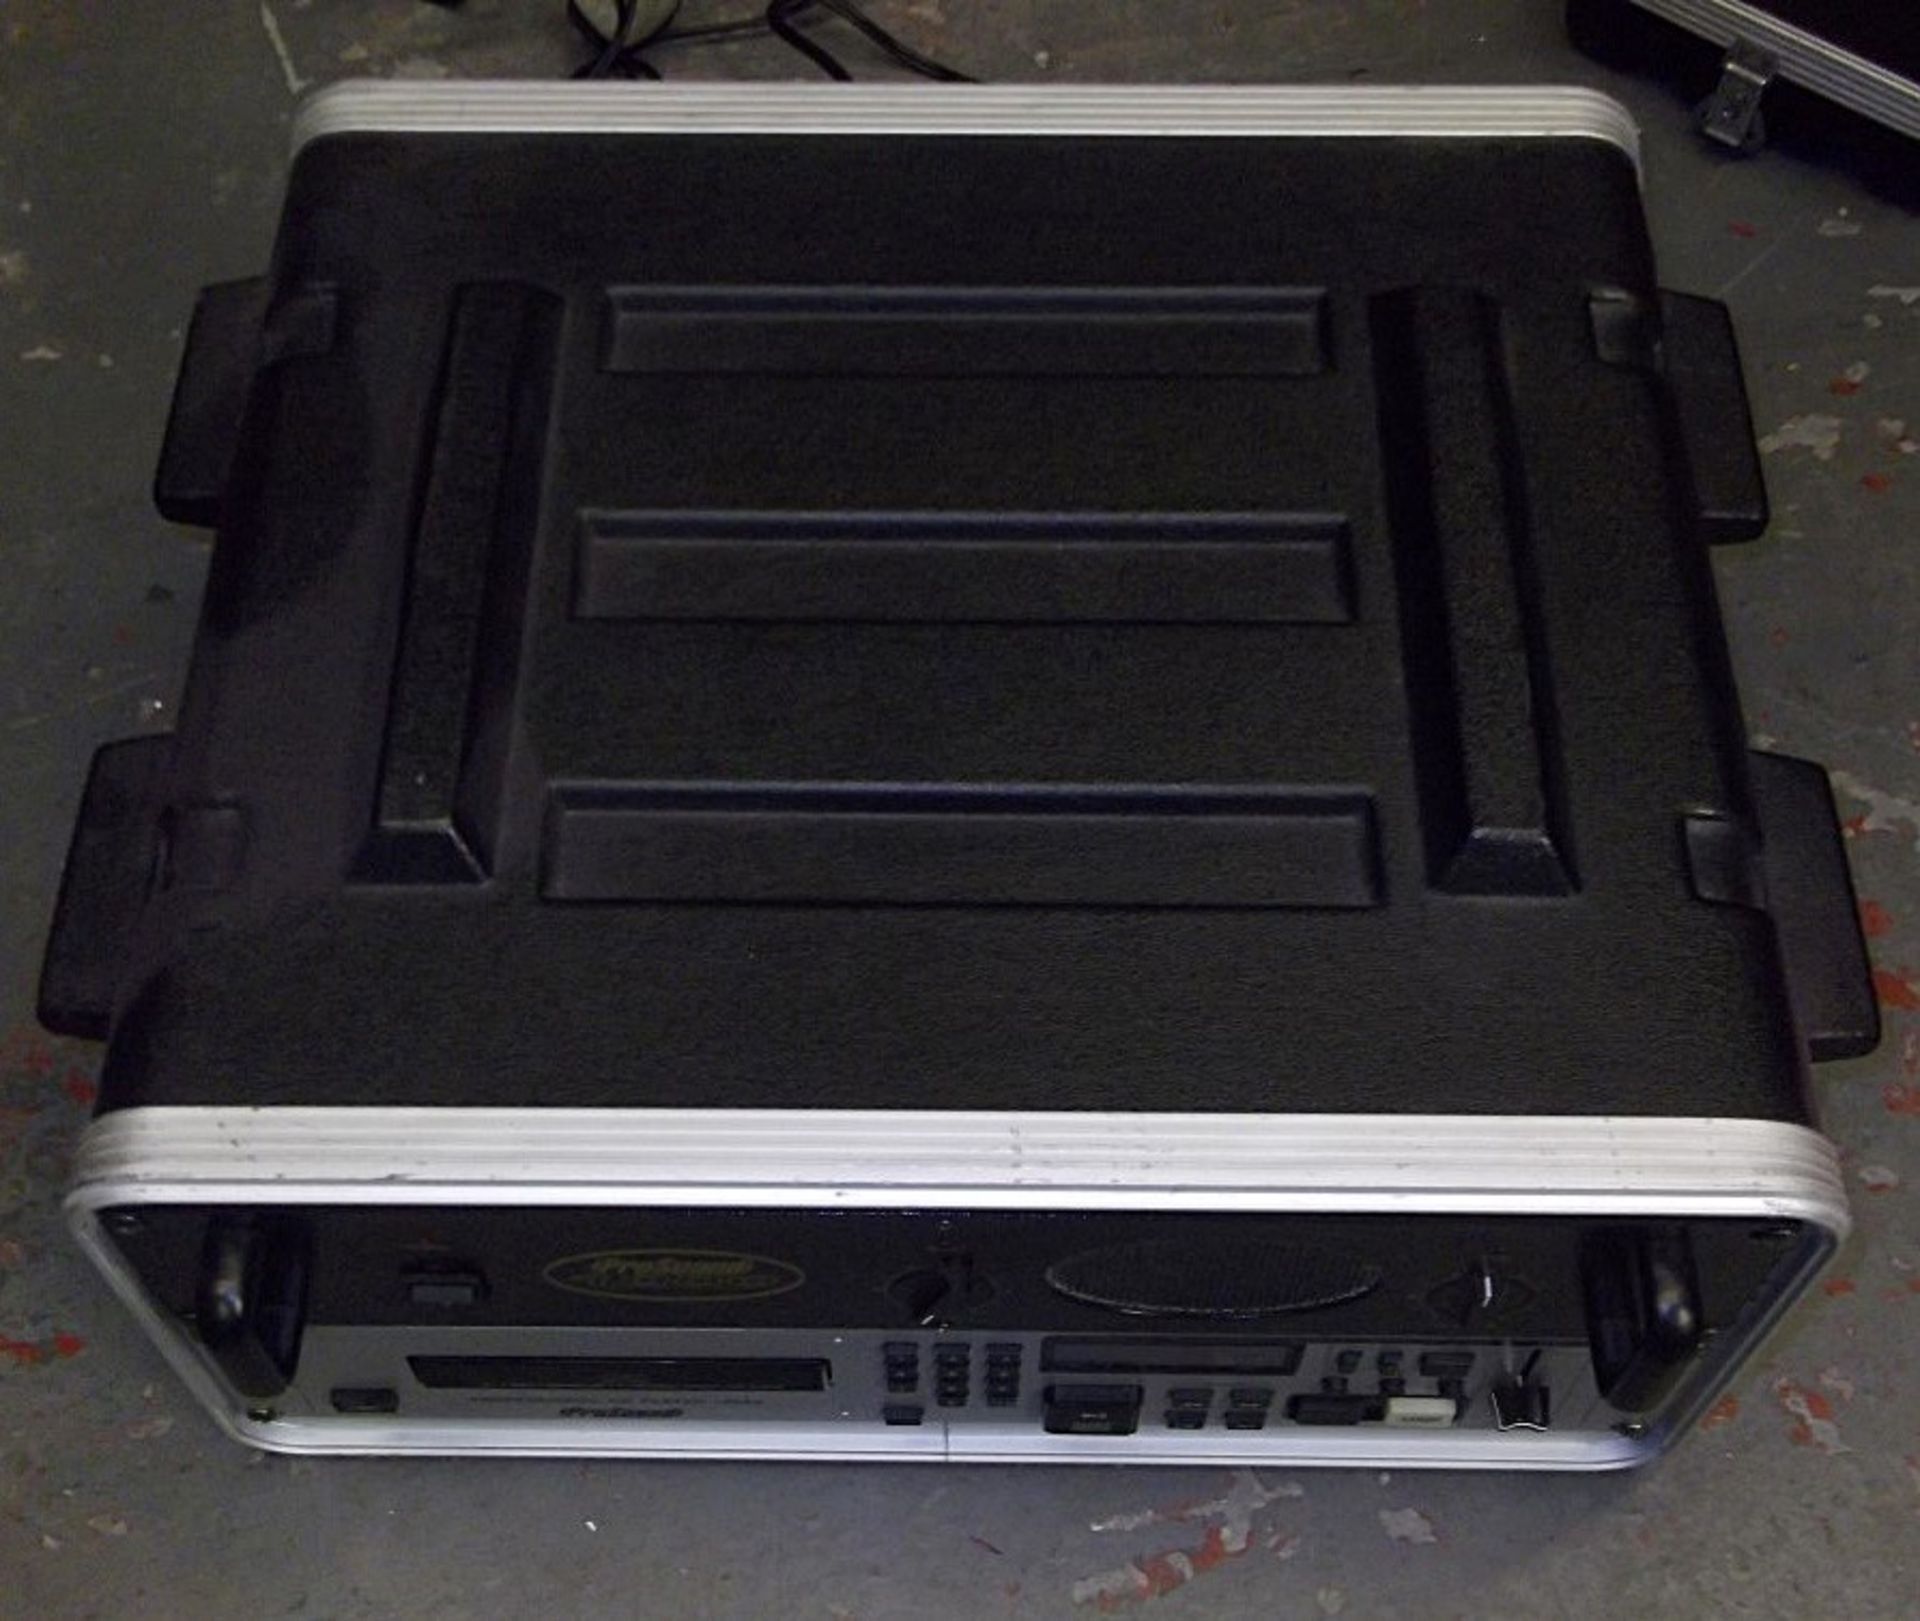 1 x ProSound 1000 - Professional Amplifier With CD Player Built Into Flight Case - Good Working - Image 7 of 11